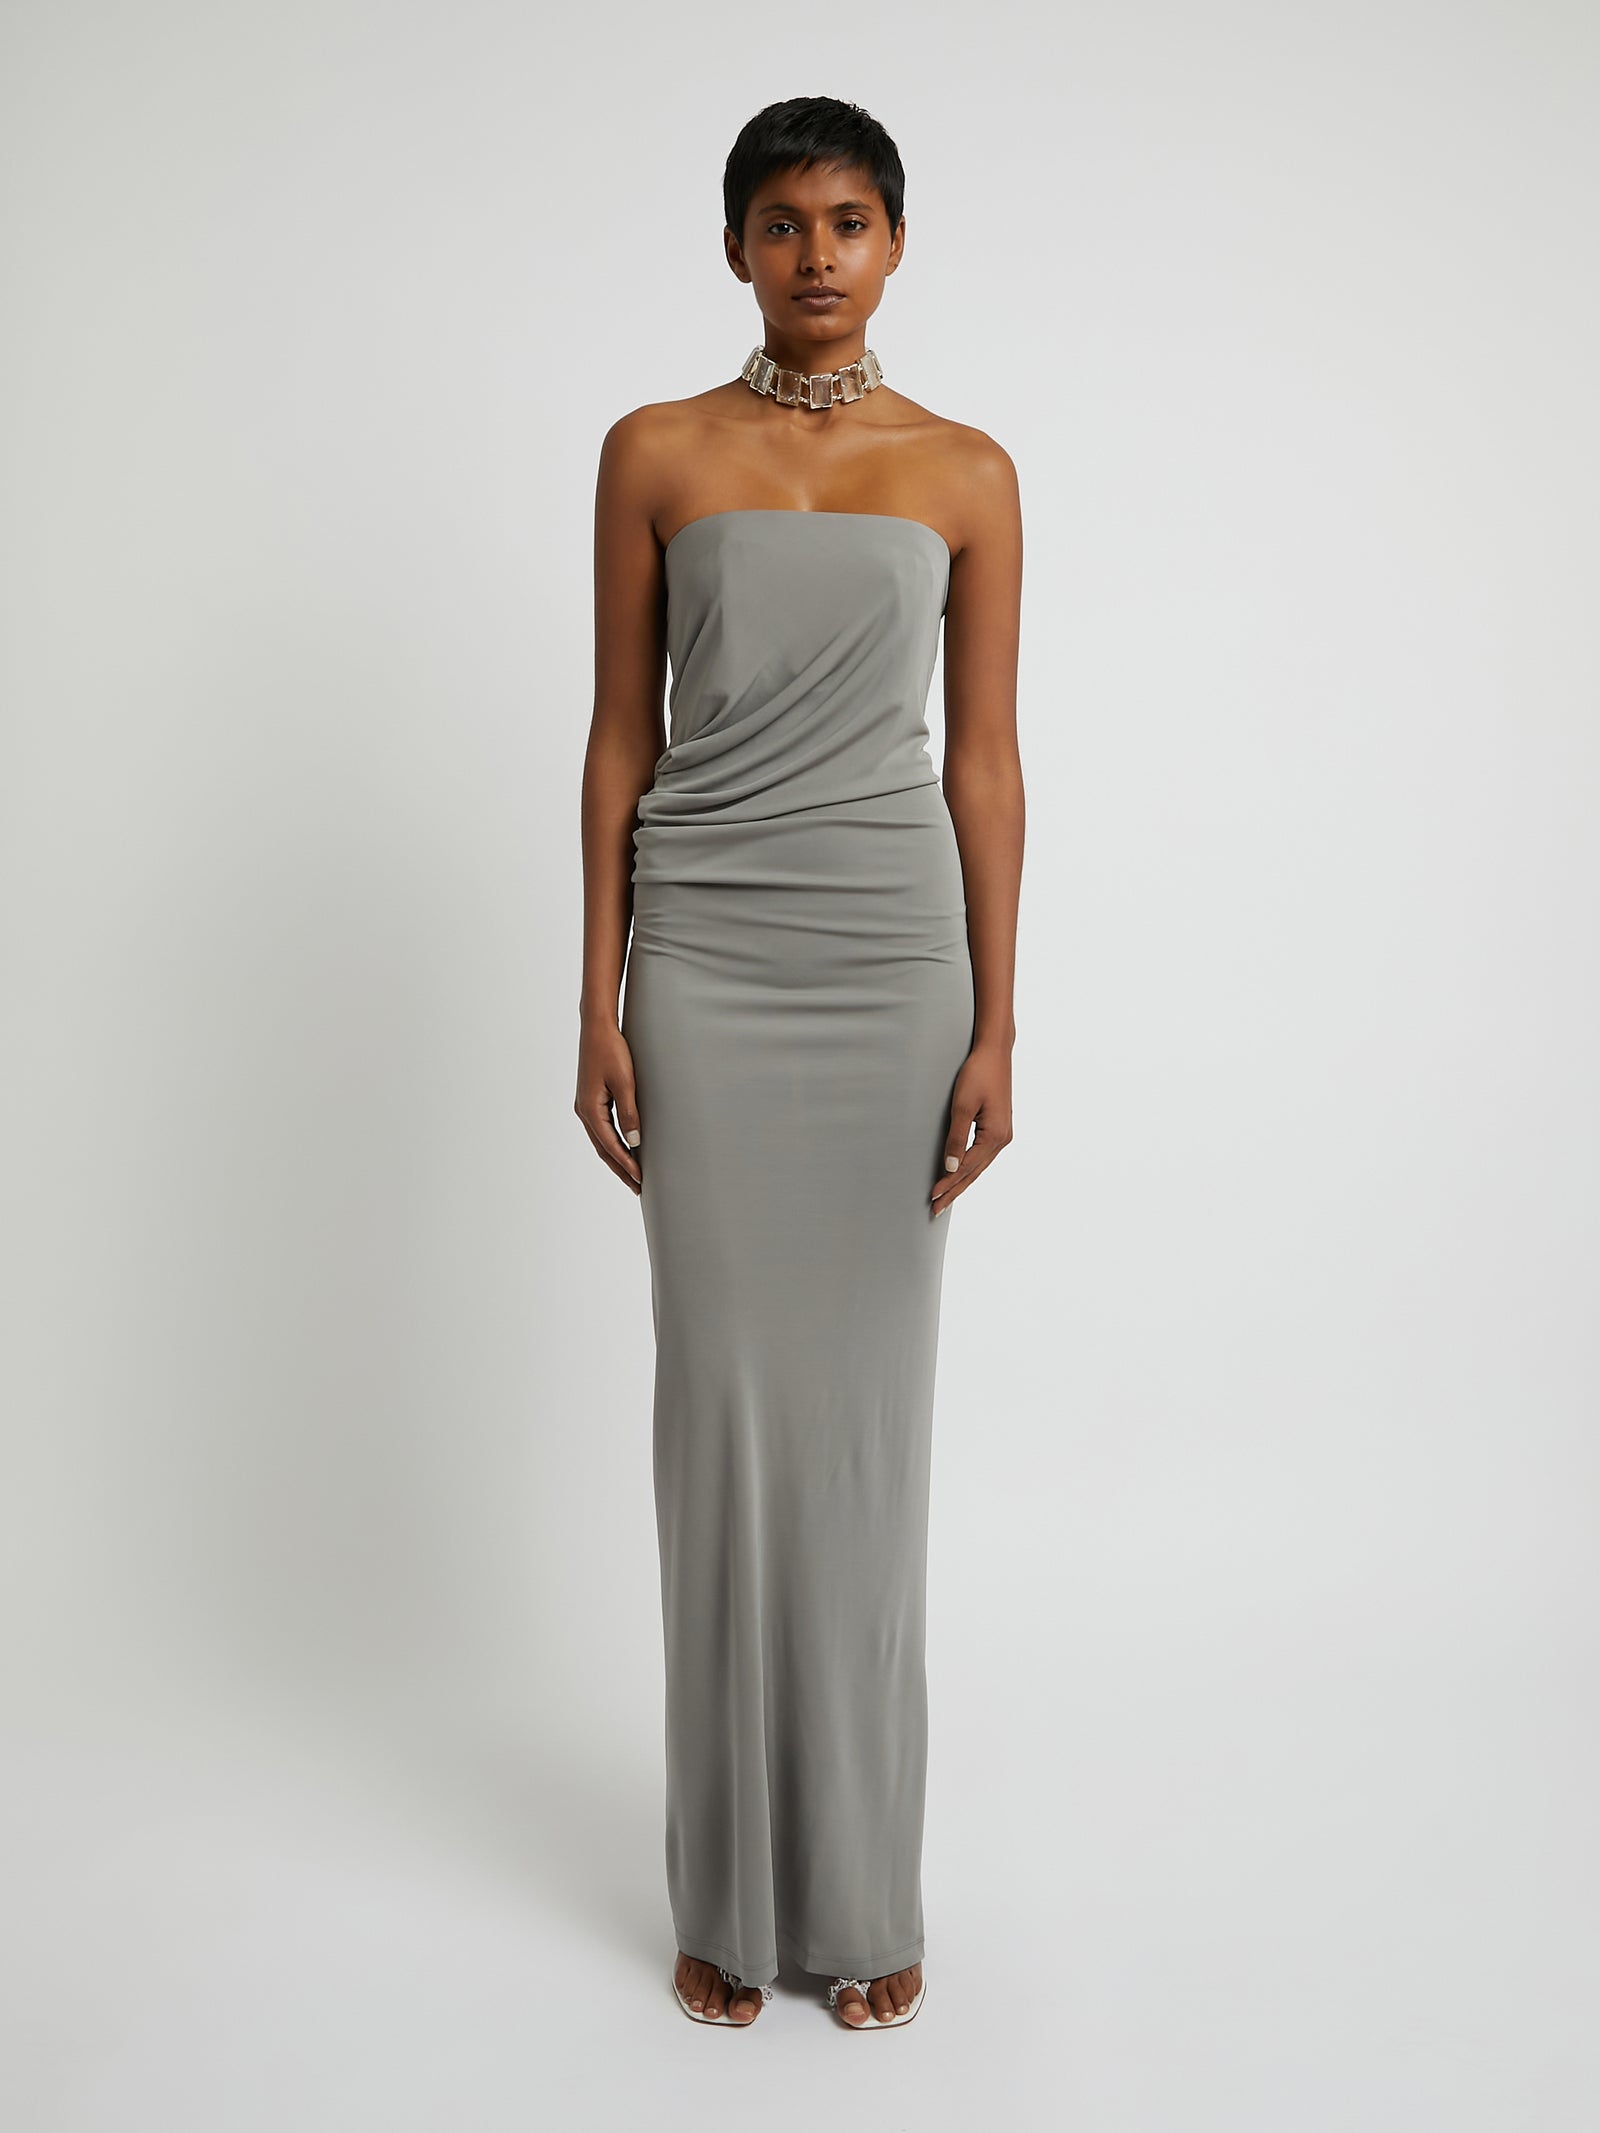 Strapless Ruched Dress